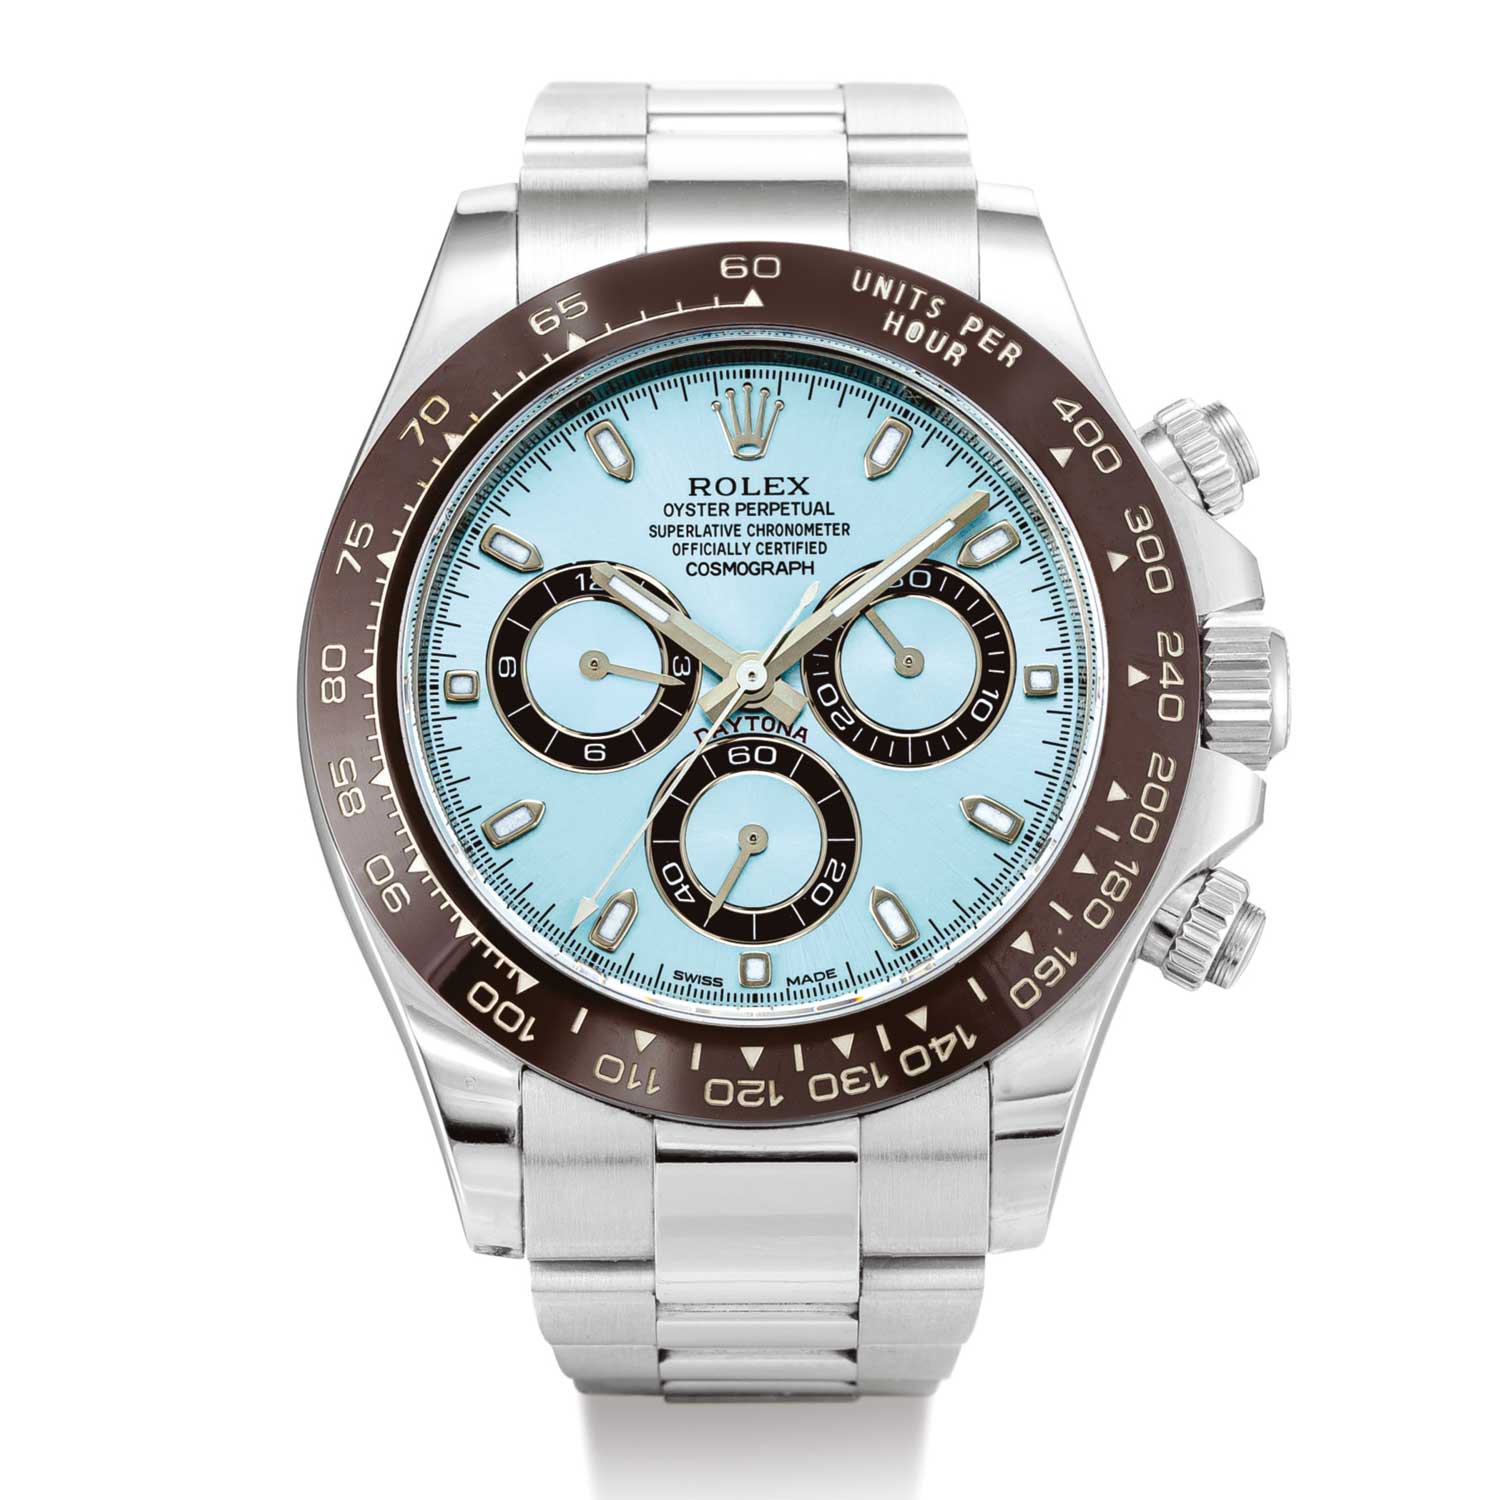 The 50th anniversary of the Daytona in 2013 was marked by the launch of the 116506. Somehow the pairing of the ice-blue dial and brown Cerachrom bezel just works. Not forgetting that it came in the stealthiest of all precious metals: a full platinum case and Oyster bracelet. (Image: Sotheby’s)